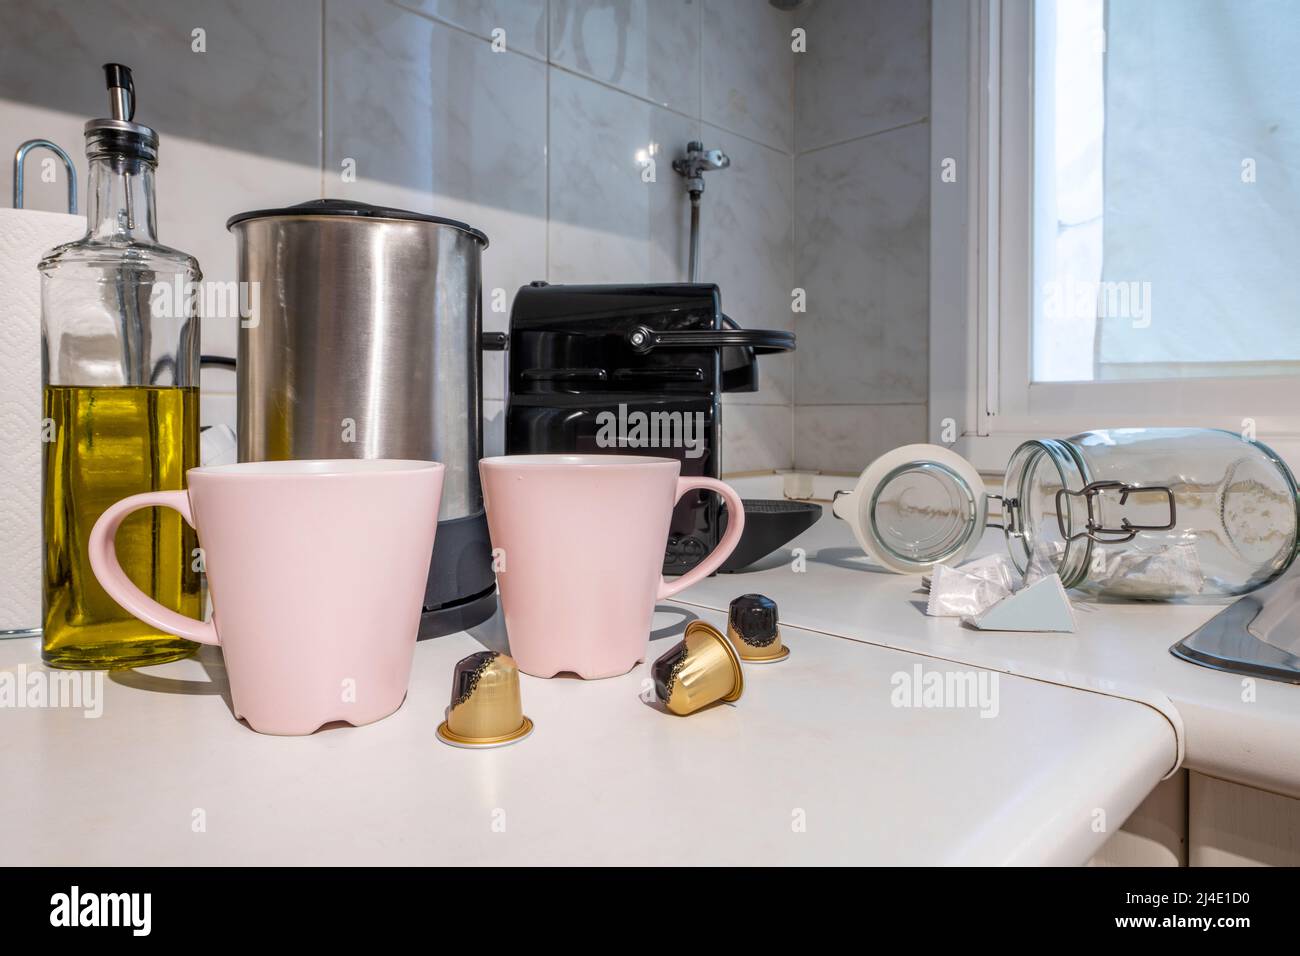 https://c8.alamy.com/comp/2J4E1D0/corner-of-a-kitchen-with-a-pod-coffee-machine-next-to-pale-pink-mugs-next-to-a-stainless-steel-kettle-and-oil-can-2J4E1D0.jpg